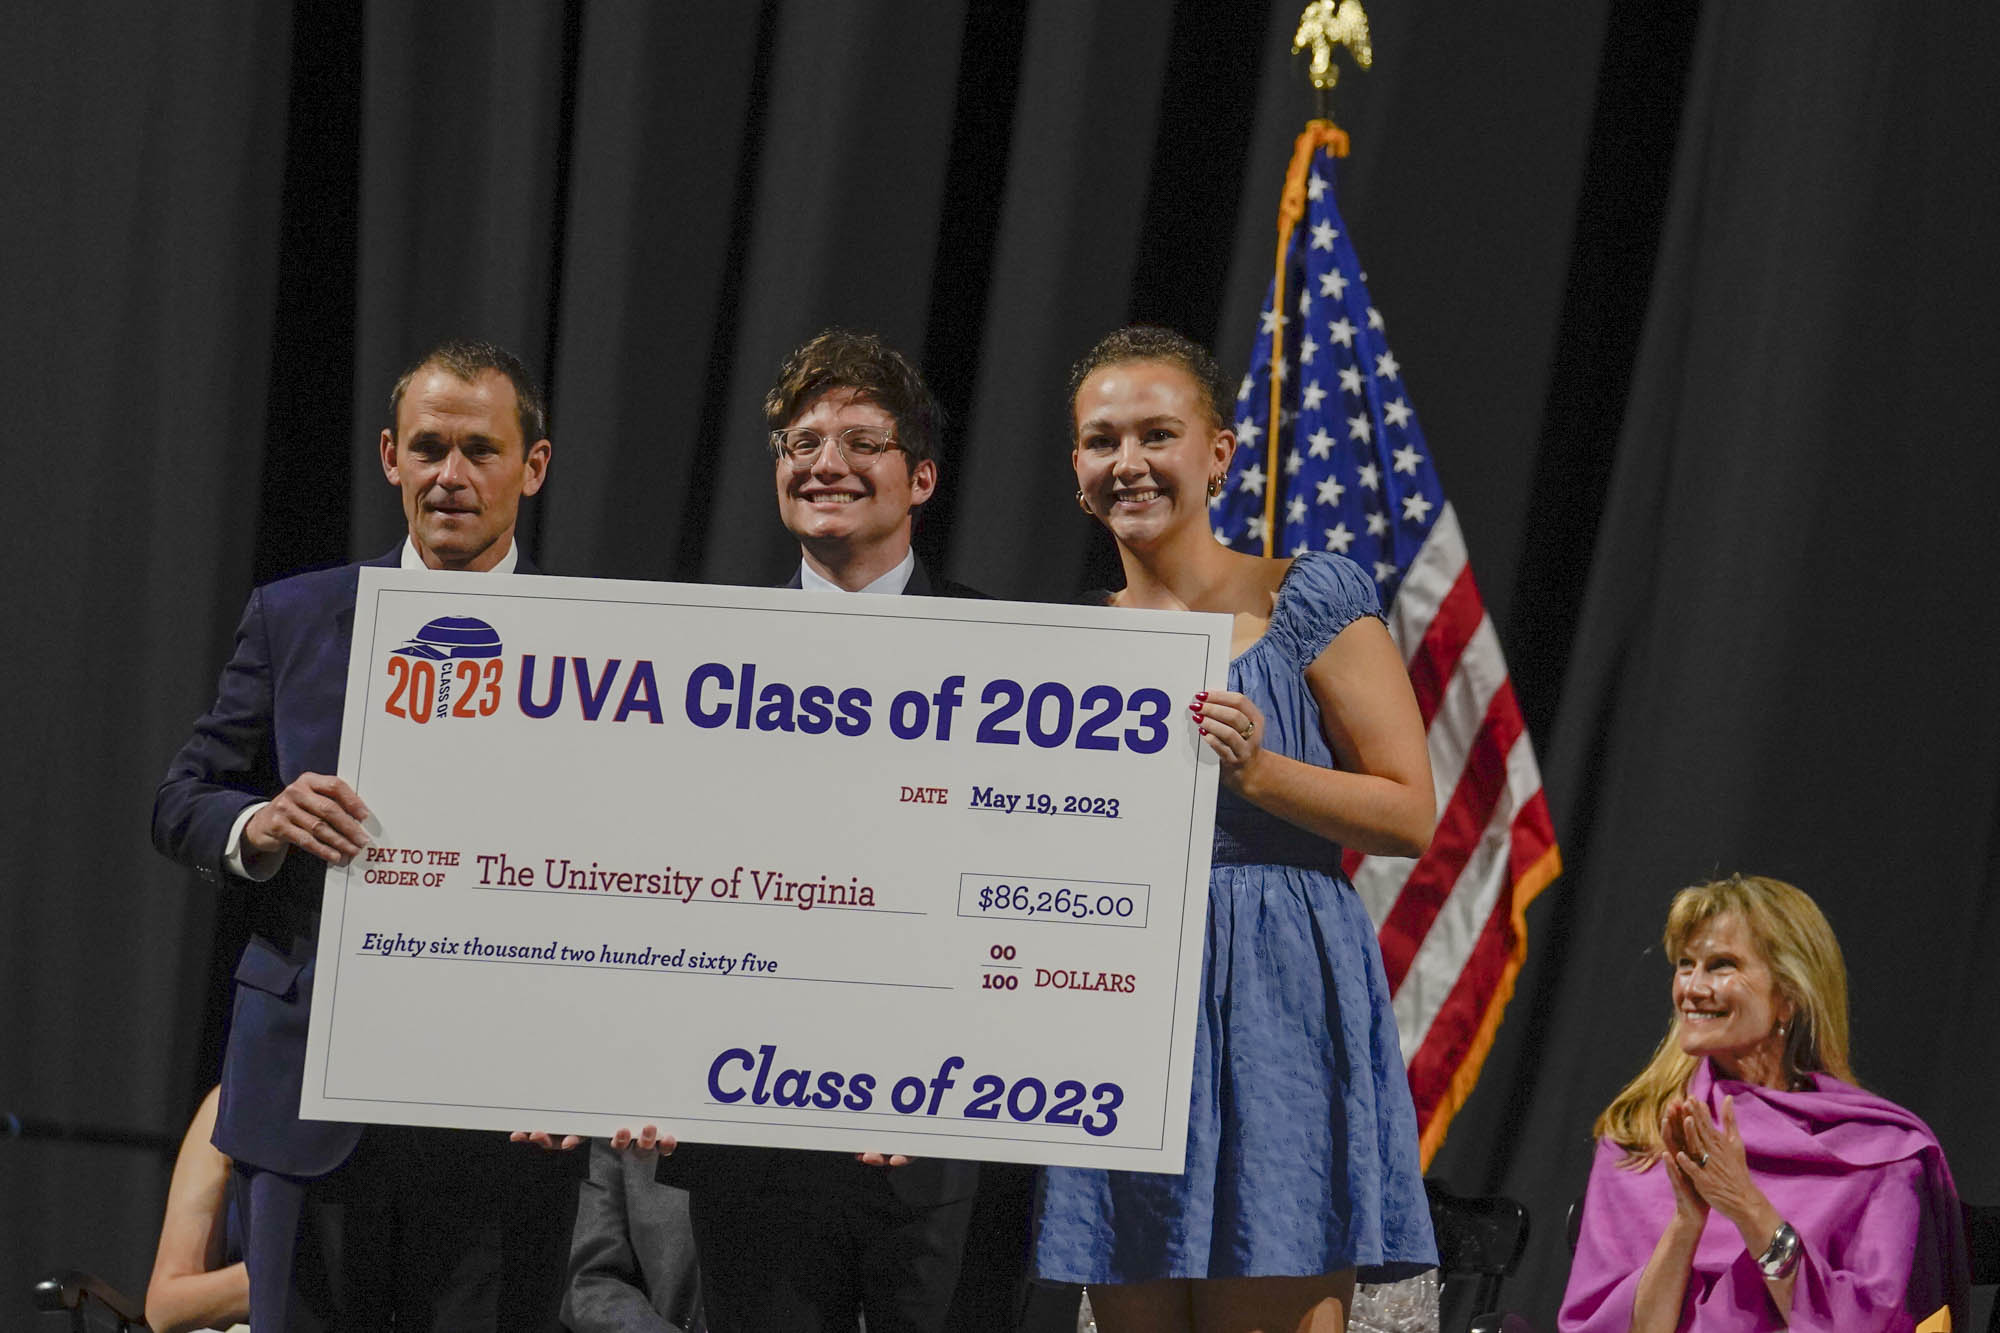 Jom Ryan accepting the Class of 2023 donation check from Ethan B. Fingerhut and Hannah L. Herzog